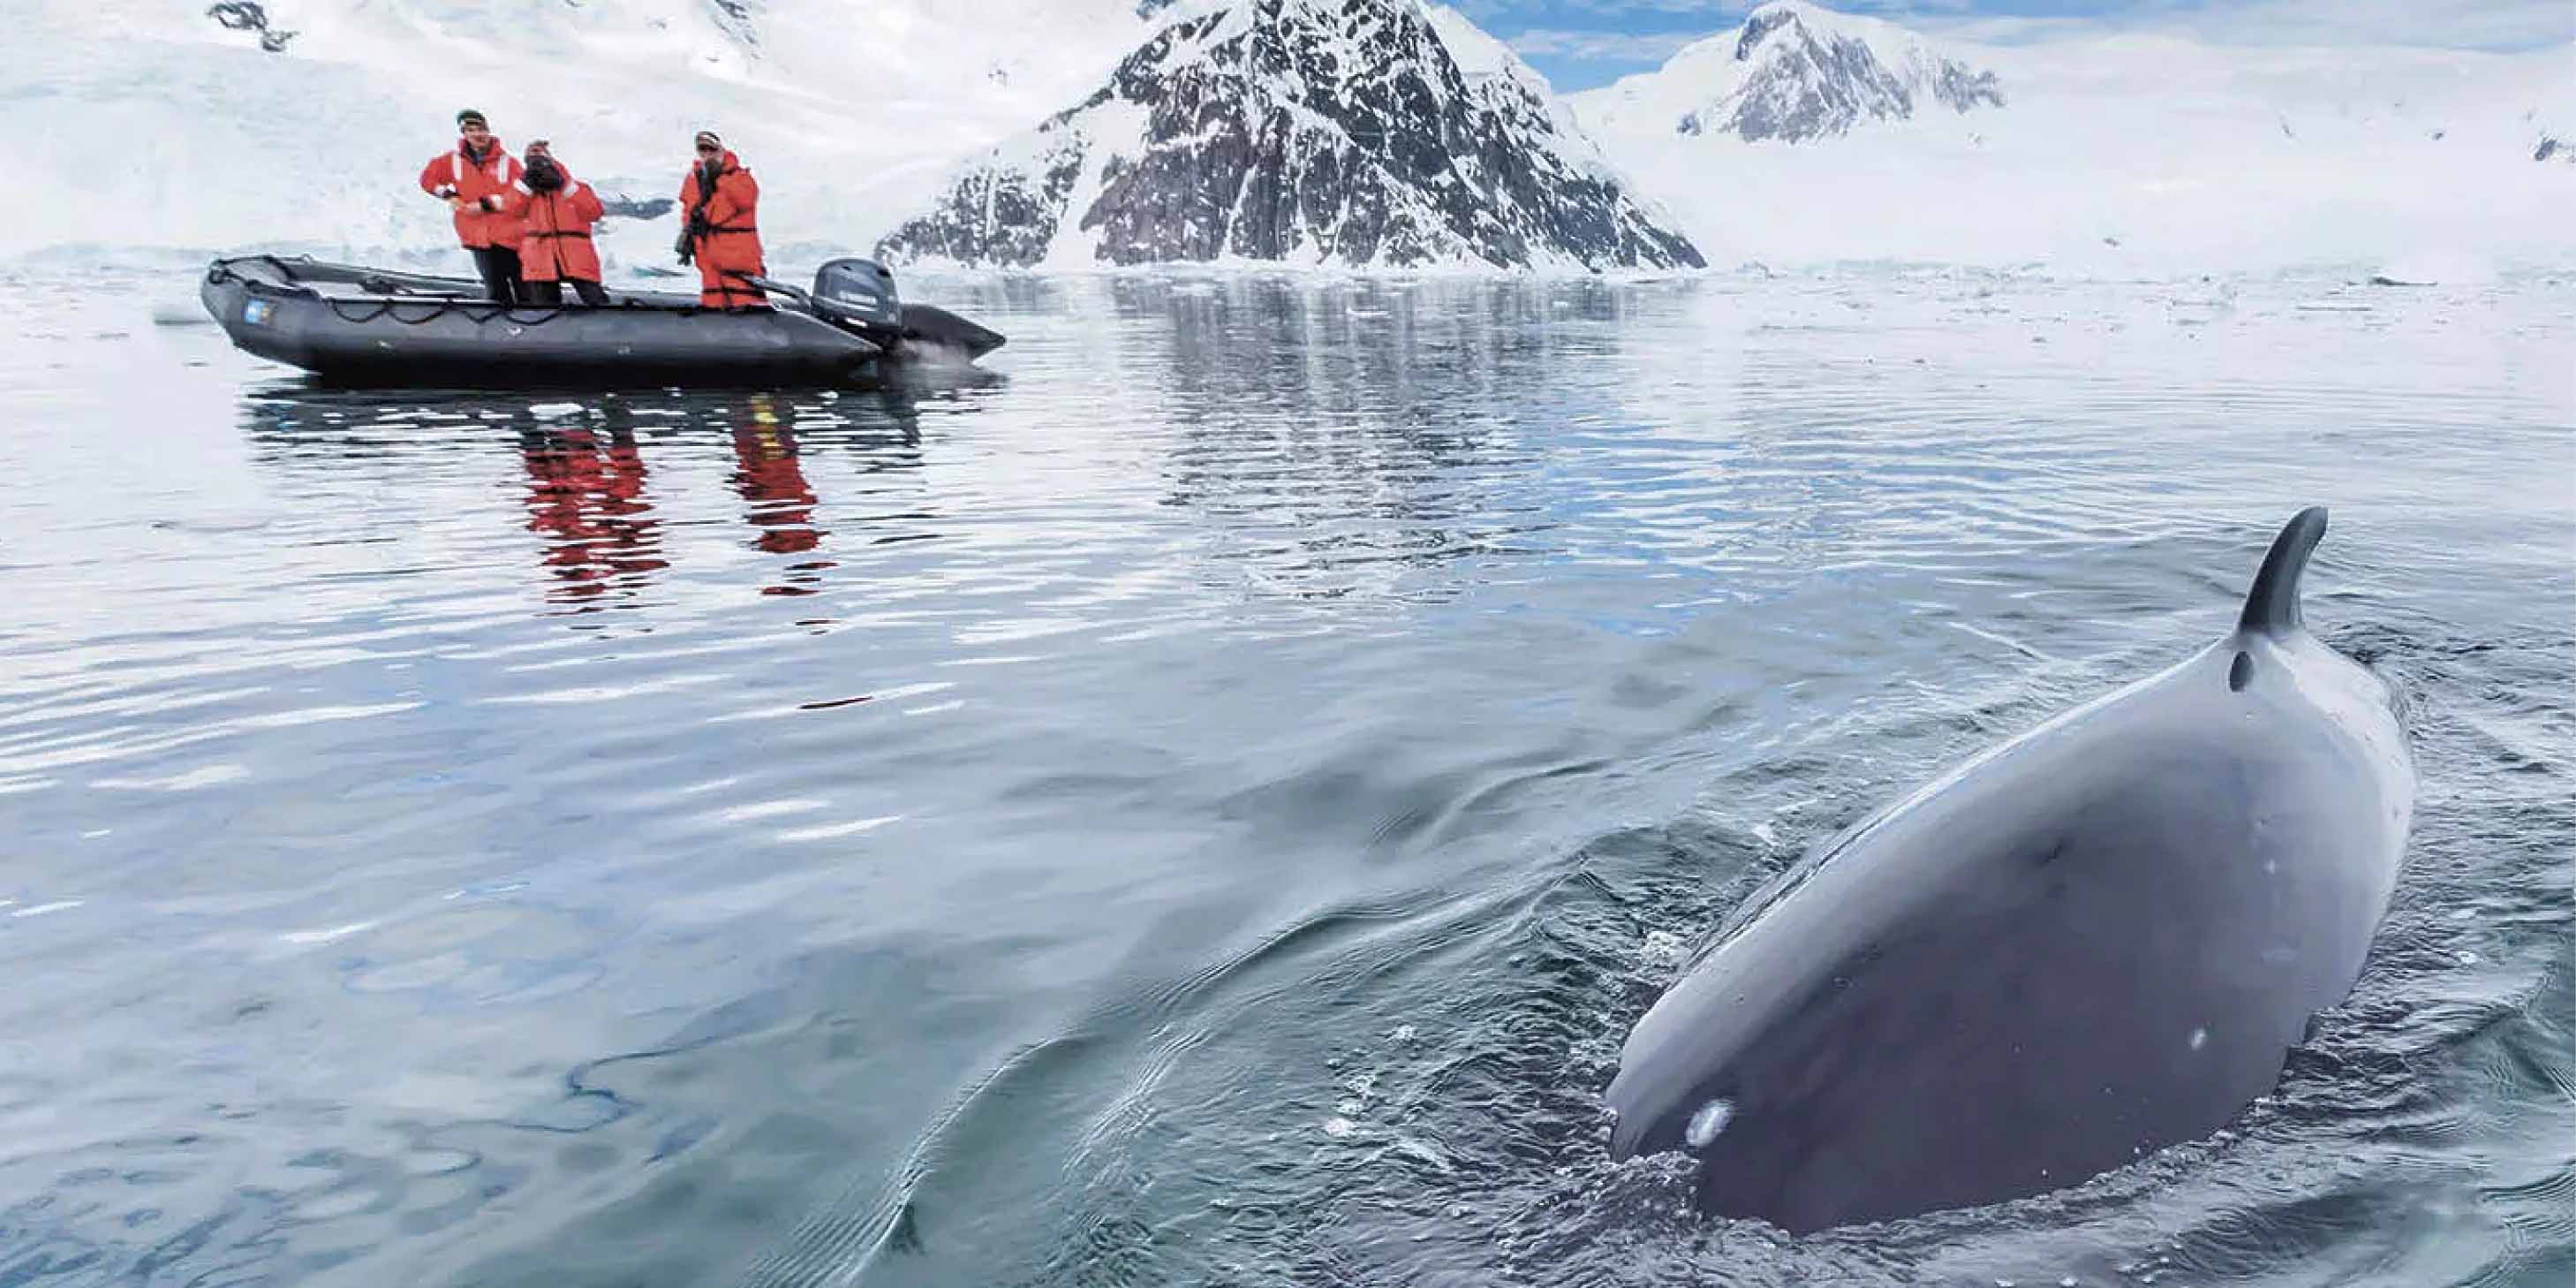 A whale in the water surrounded by ice covered mountains and people in a small boat nearby.